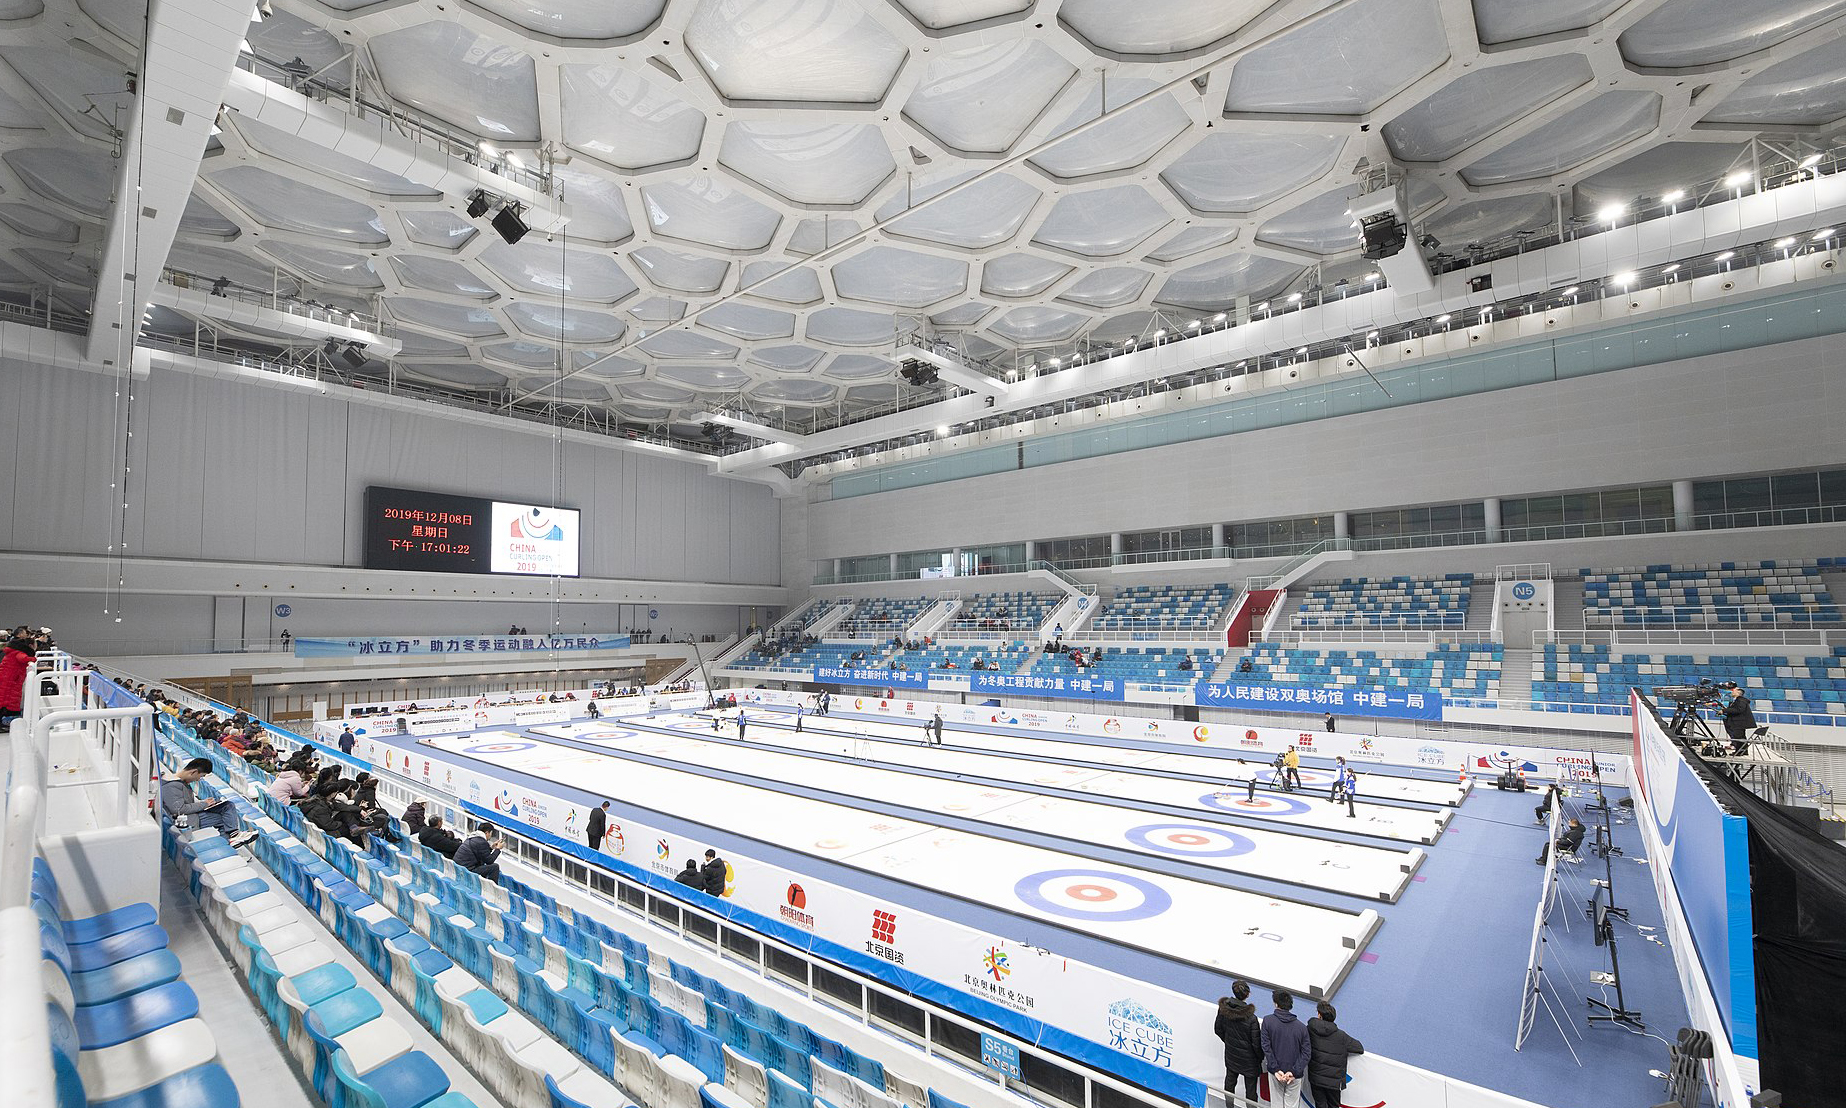 Beijing 2022 Virtualized Production of Curling Competition Hints at Future